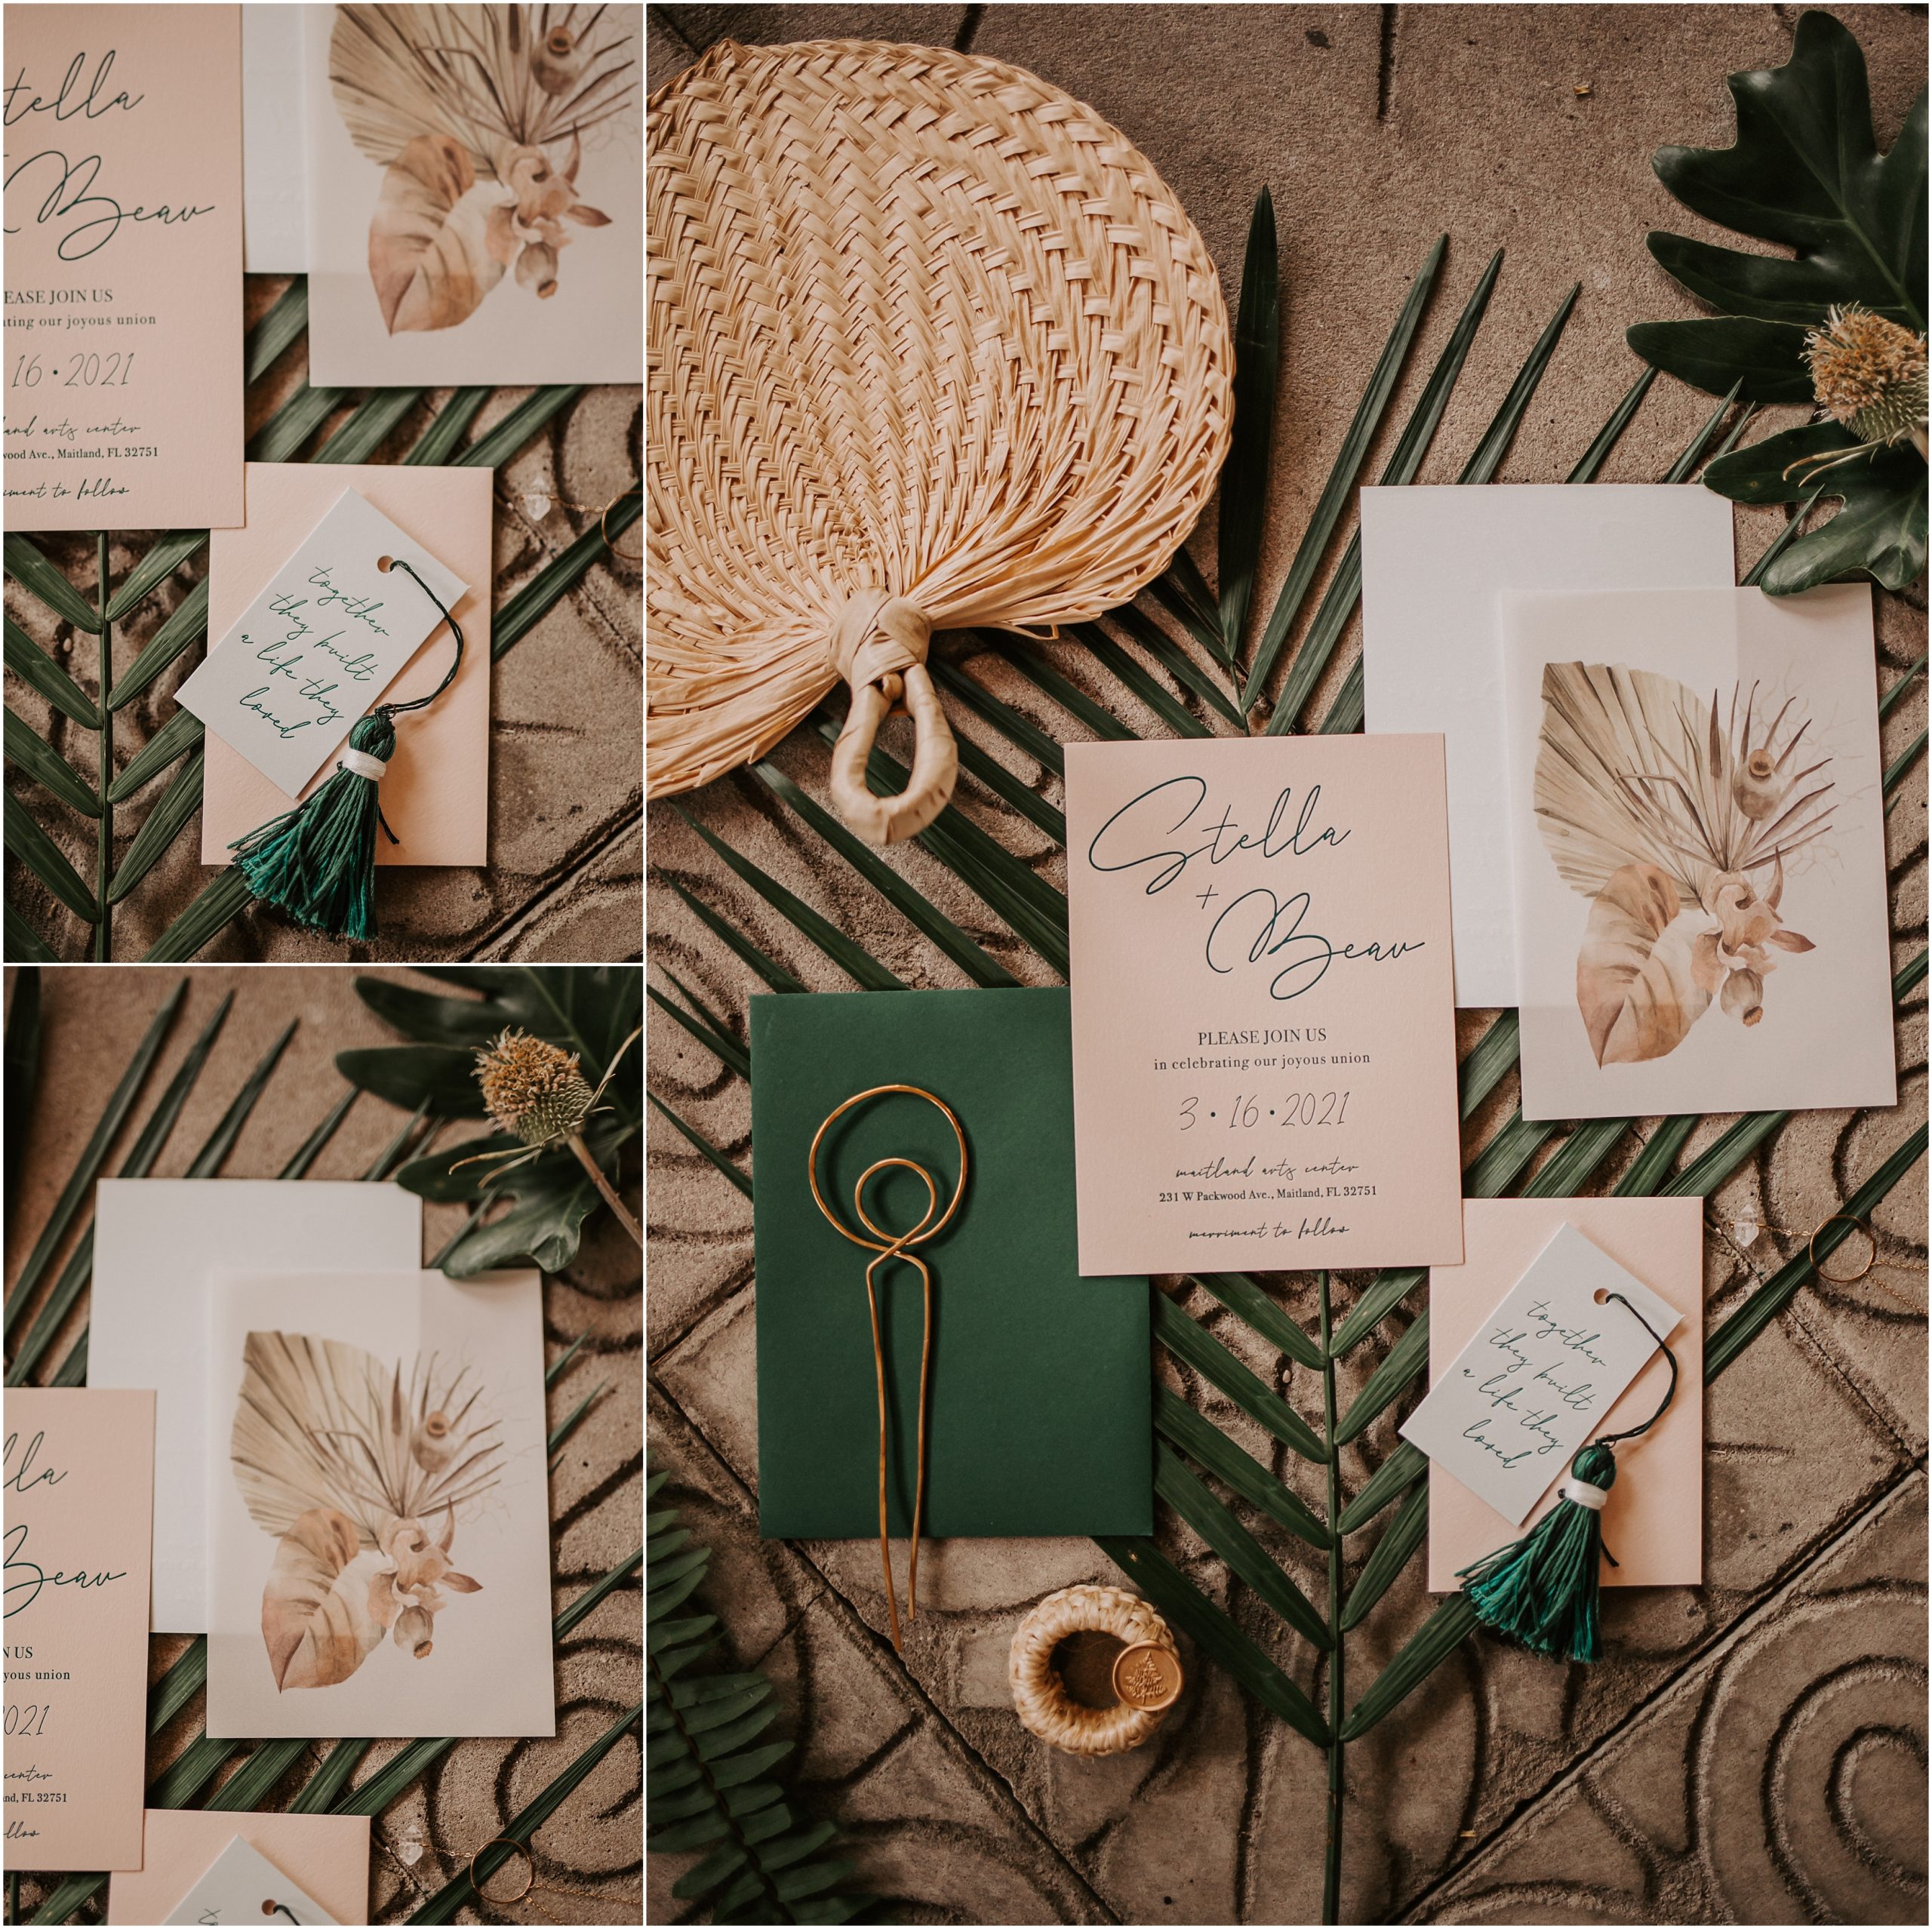 an unexpected colors that MonPetit Paper Co. incorporated to the invitation suit for the photo shoot